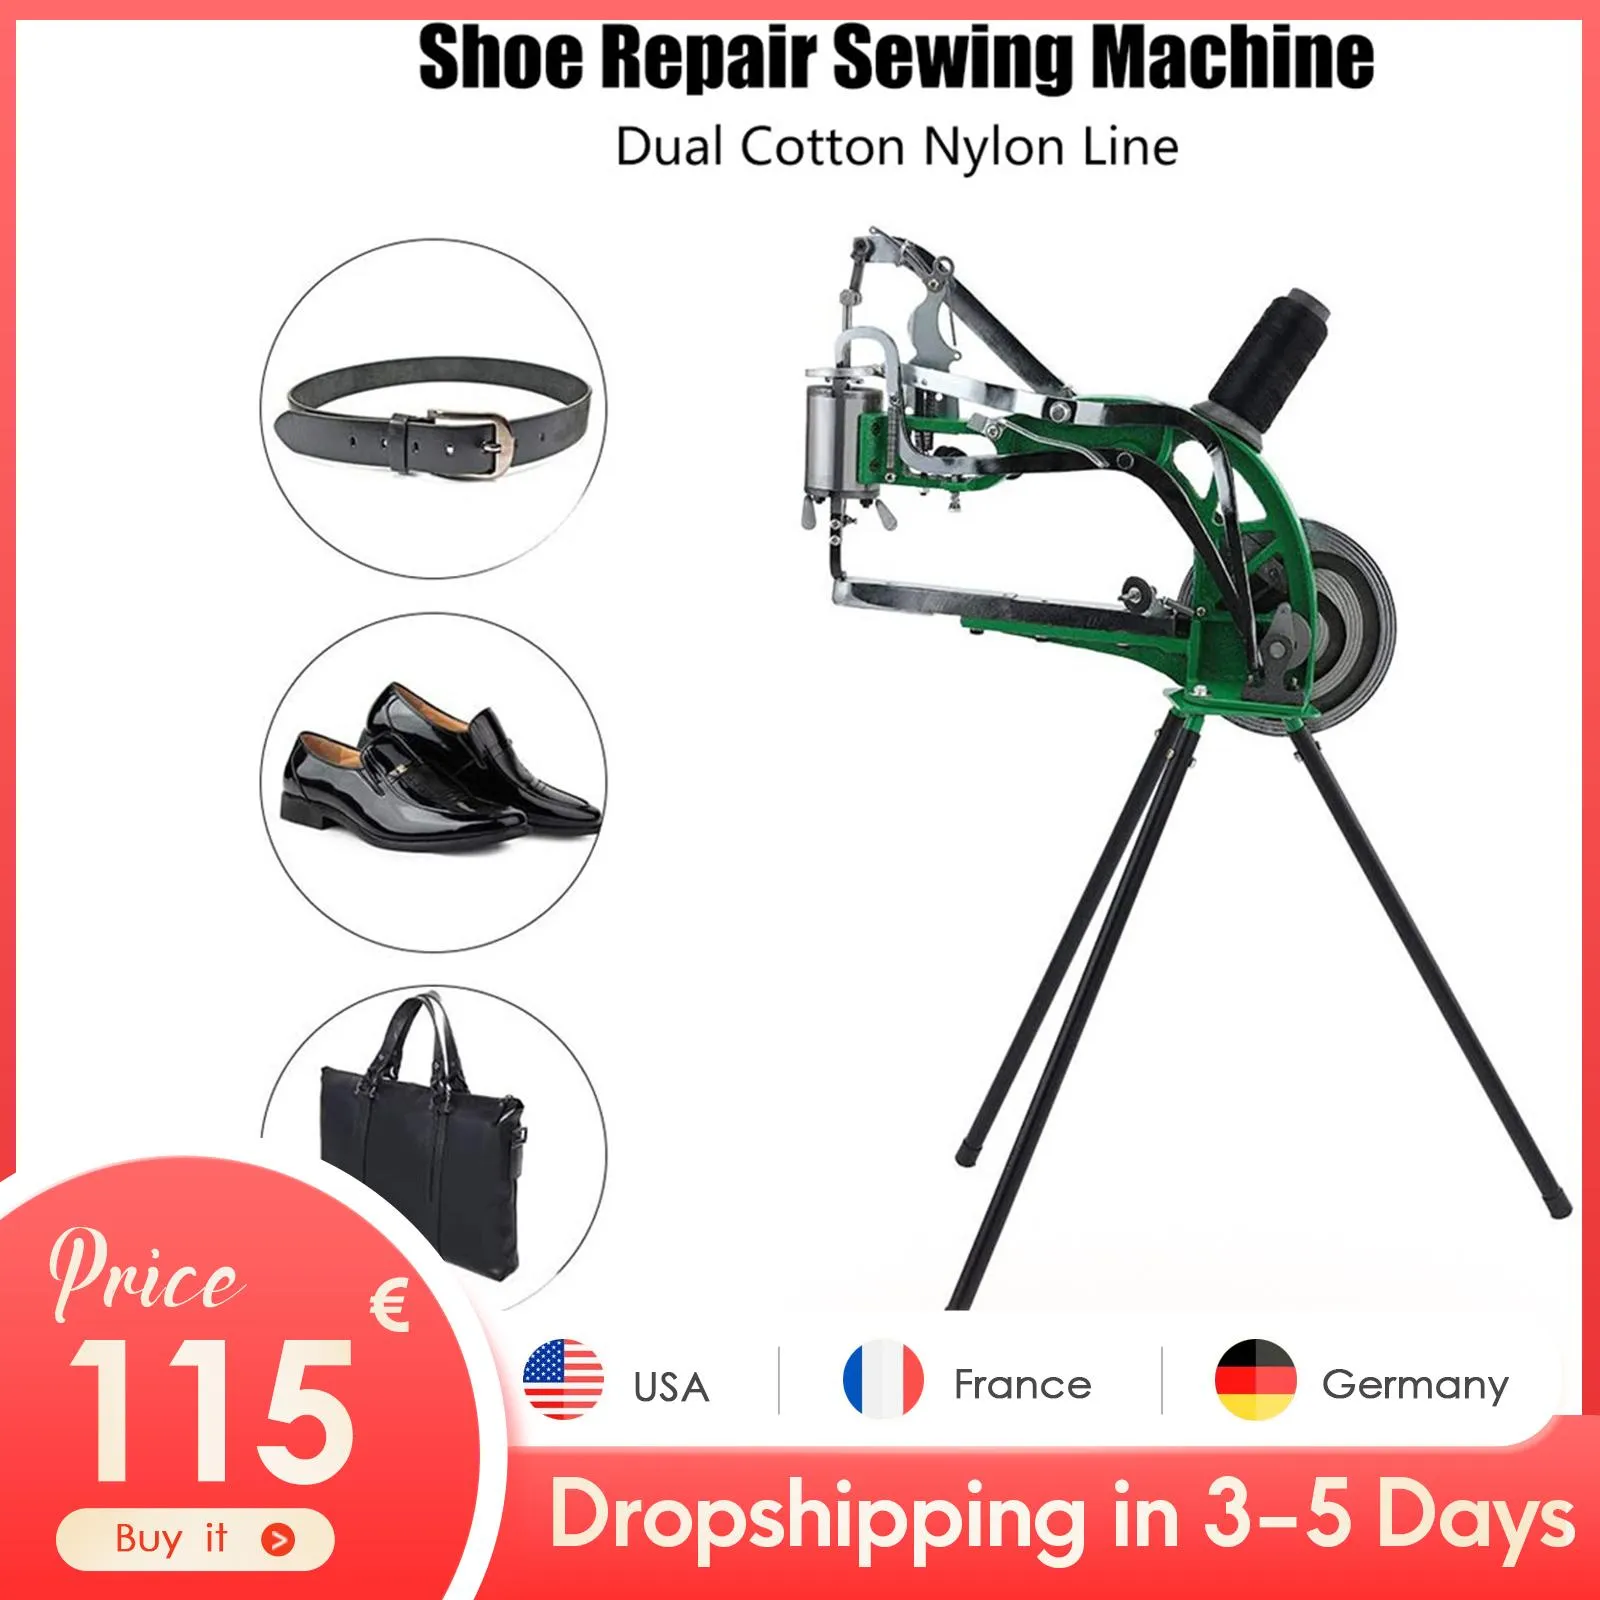 Leathercraft Shoe Repair Machine Hand Cobbler Sewing Machine Dual Cotton Nylon Line Sewing Machine Manual Leather Machine For Shoes Cloth